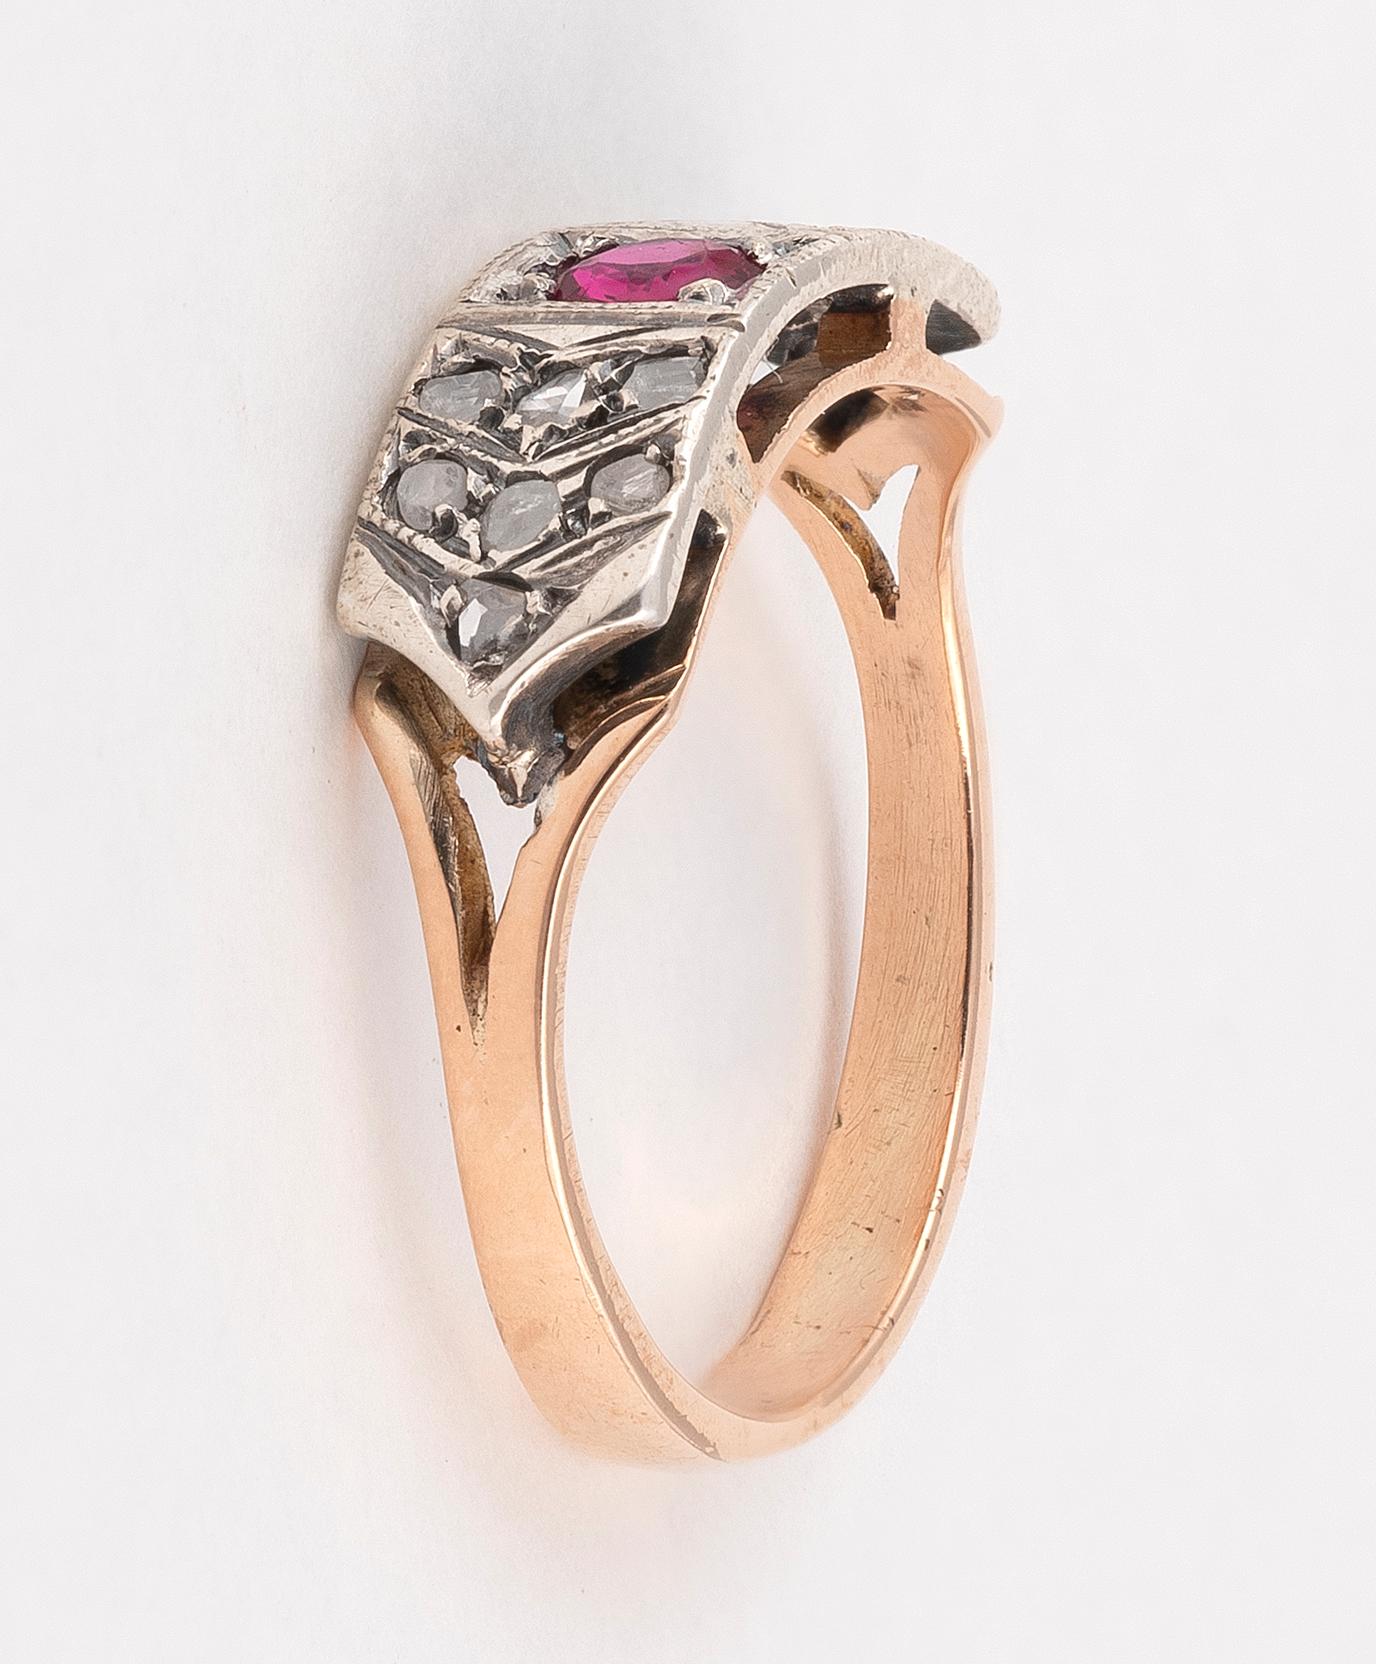 
Band silver & gold rose diamond and ruby ring.
Size : 7
